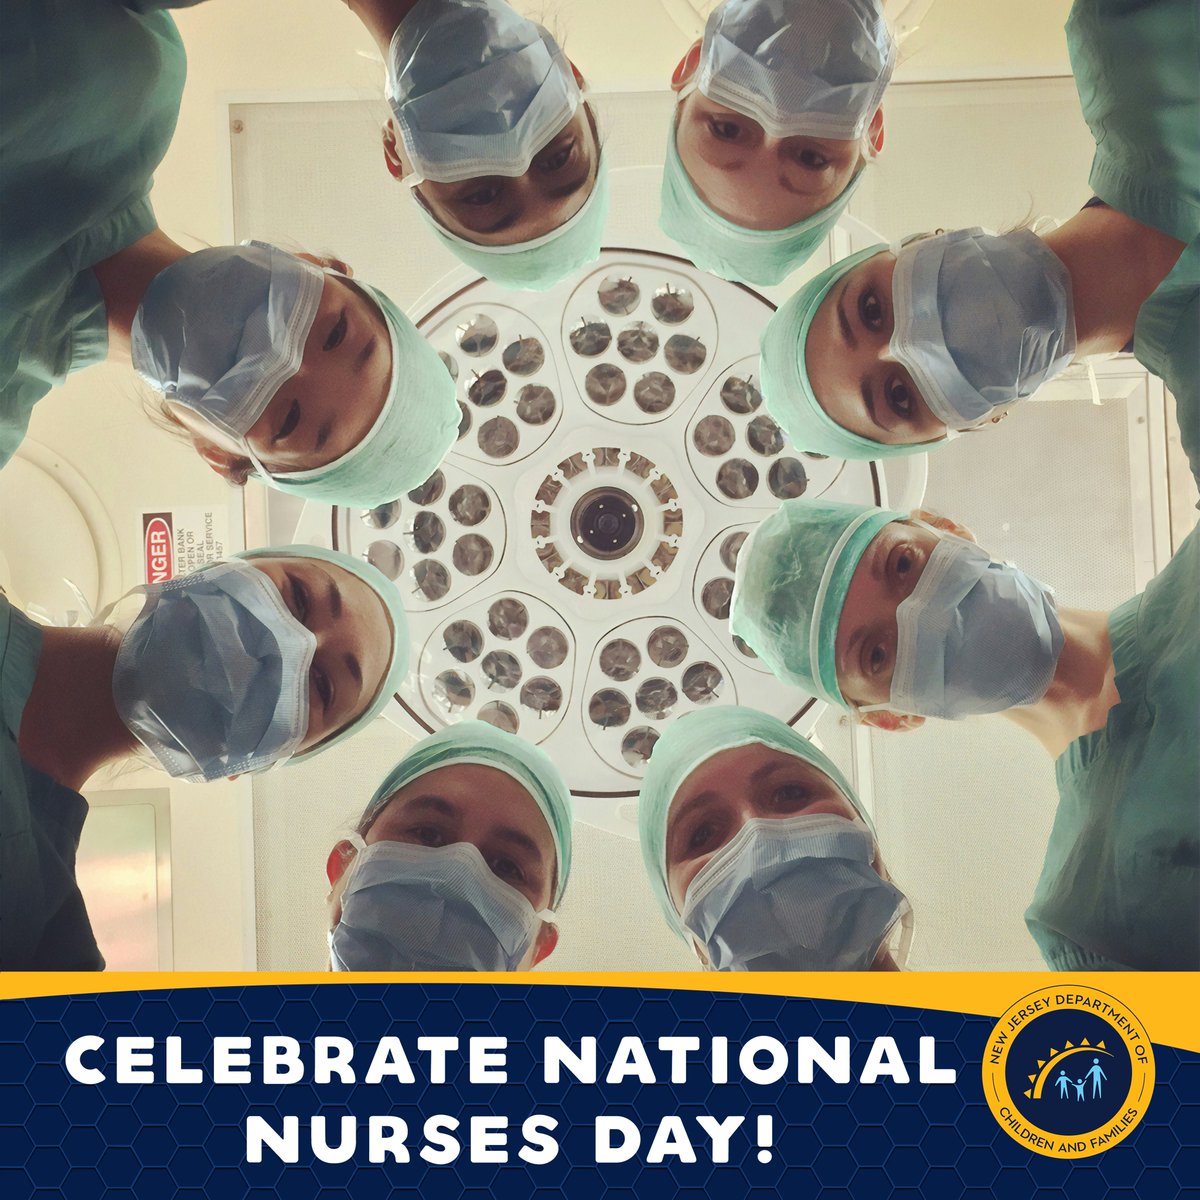 Today is #NationalNursesDay

#TeamDCF values and appreciates the work of our nurses in CP&P, CSOC and OOE! Their skills, patience, dedication and compassion helps DCF keep NJ residents safe, healthy and connected.

Celebrate National Nurses Day by thanking a nurse you know!